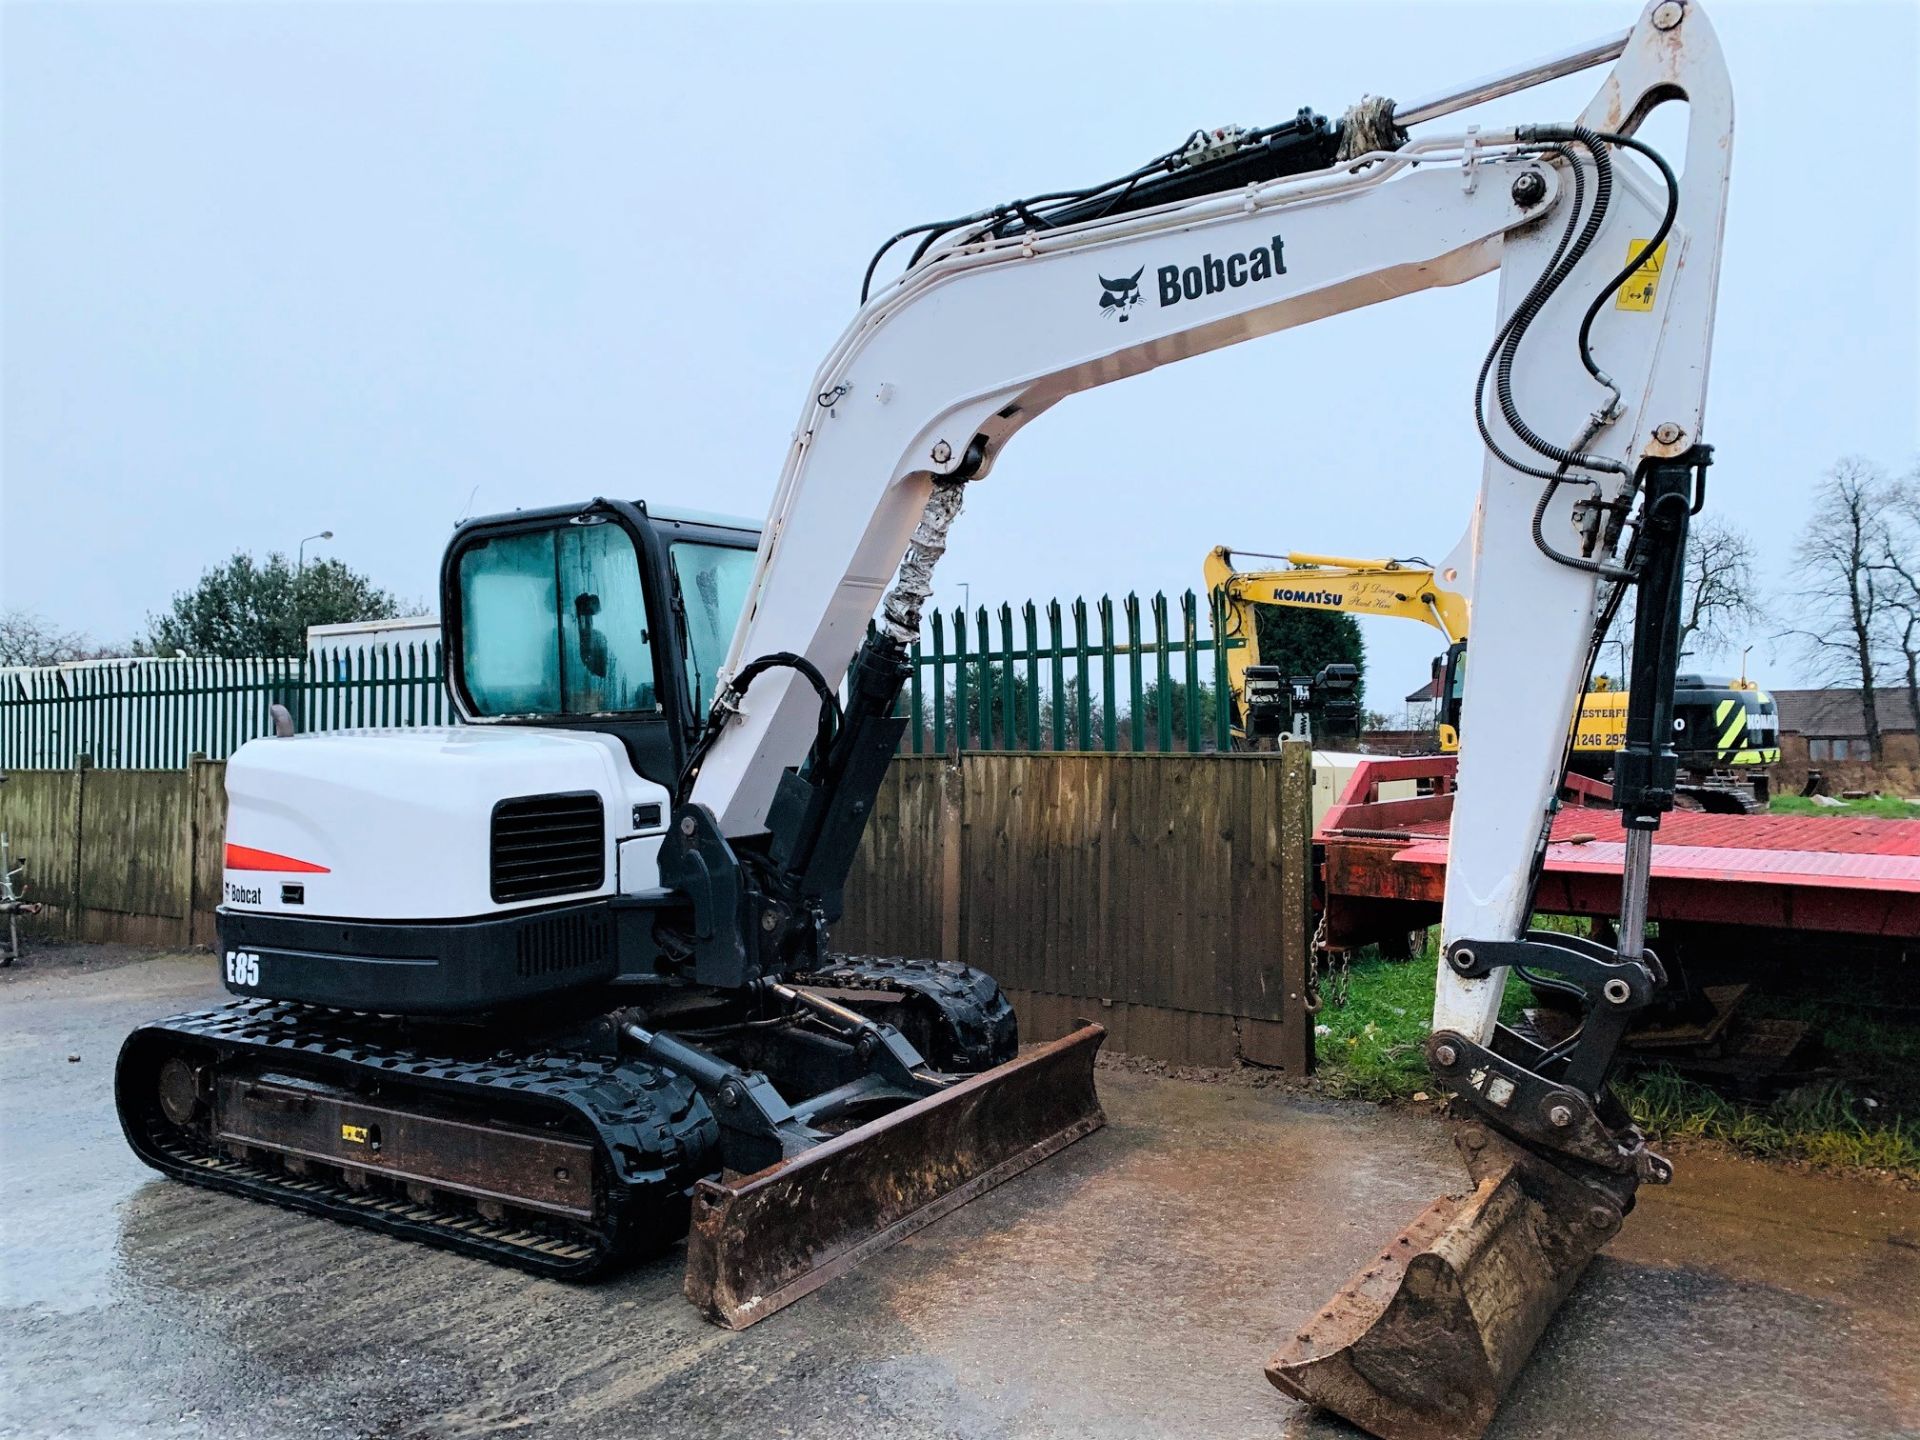 BOBCAT E85 RUBBER TRACKED CRAWLER DIGGER / EXCAVATOR, YEAR 2014, 3637 HOURS, AIR CON, CE MARKED - Image 5 of 13